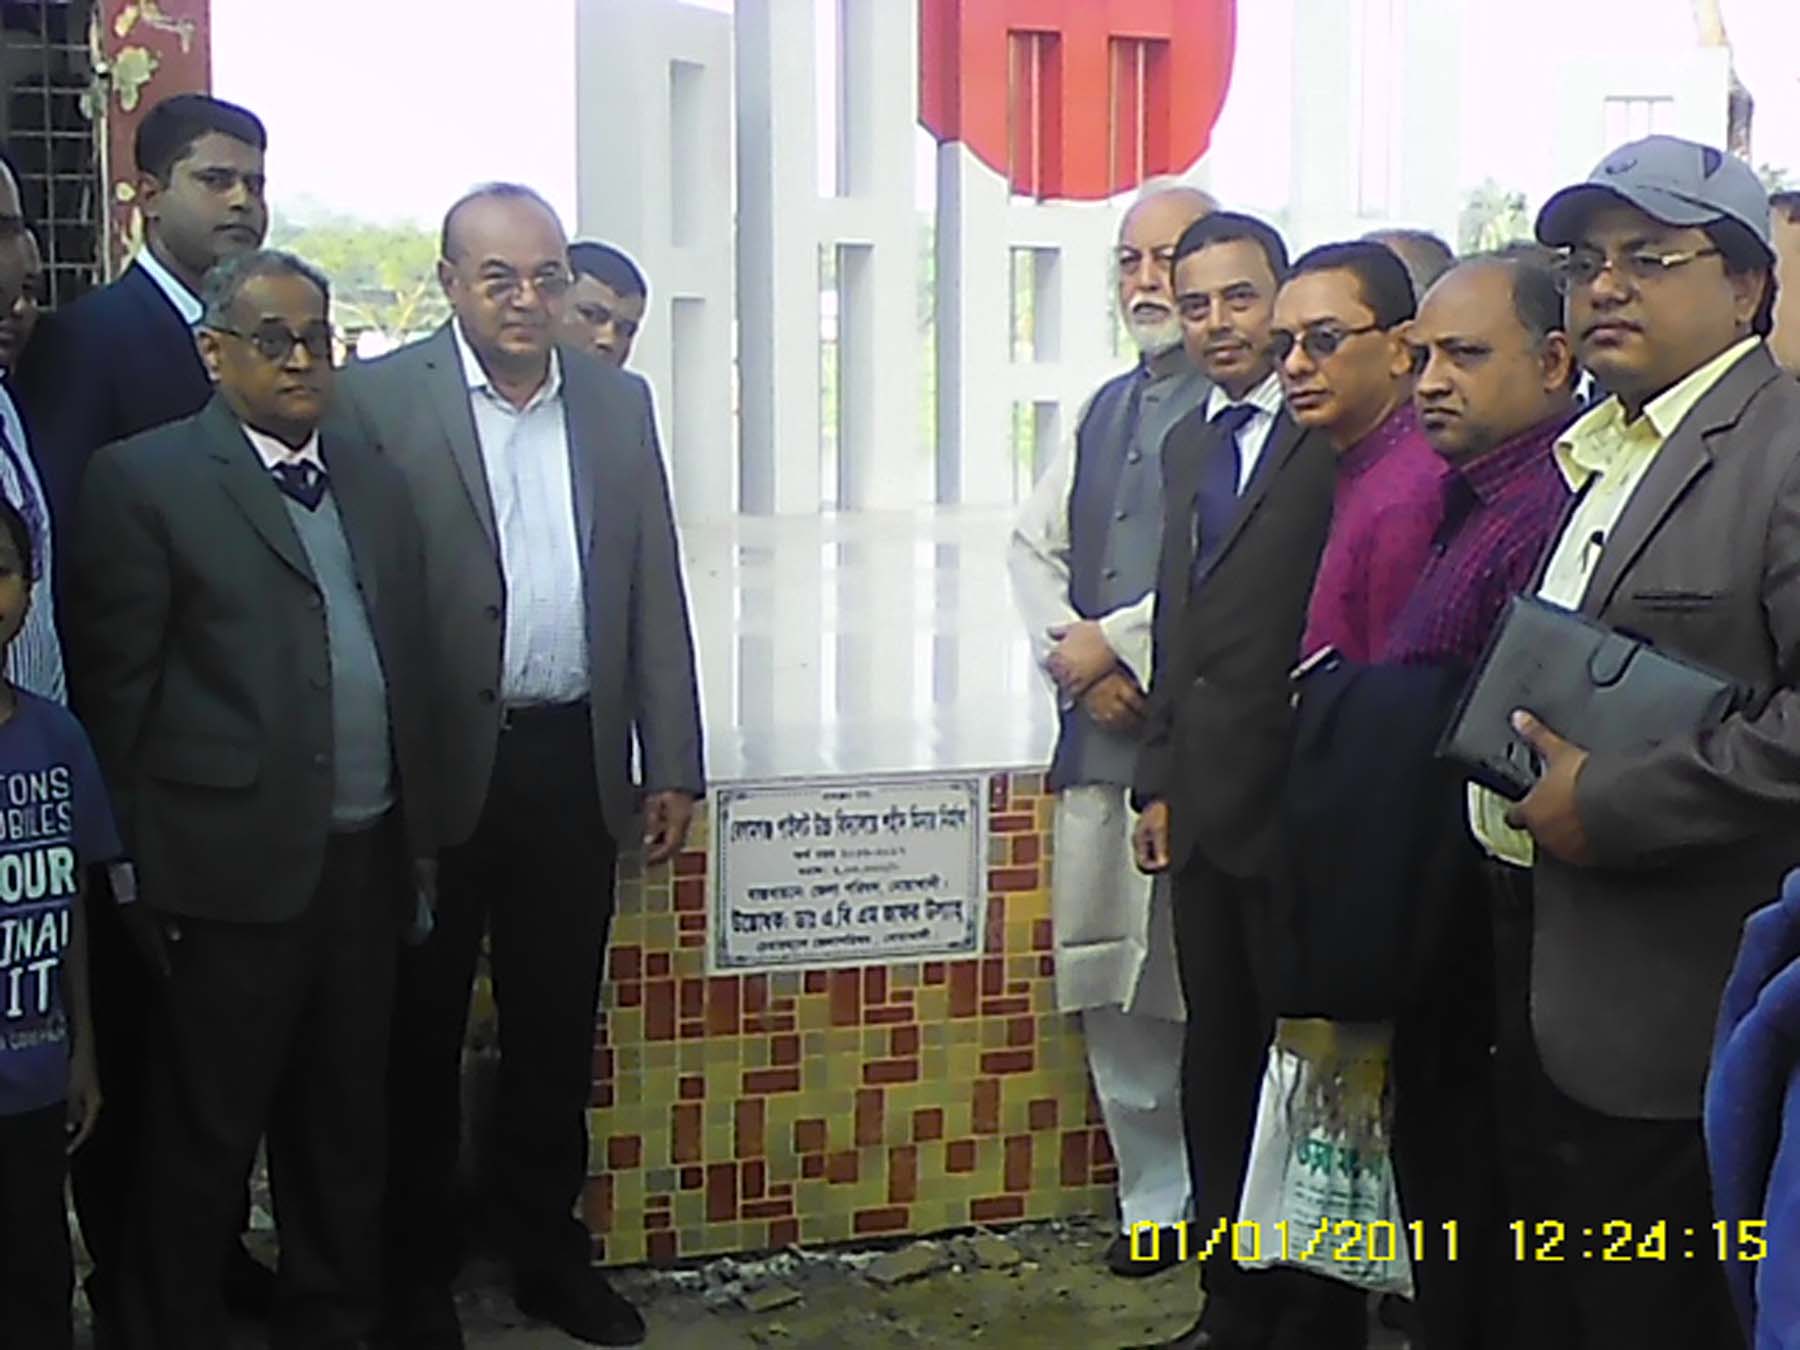 In the picture- Noakhali Zilla Parishad Chairman ABM Jafar Ullah laid the foundation stone of Begumganj Government Pilot High School's Shaheed Minar. Other leaders including Chairman of Begamganj-Sonaimuri Shikkha O Sastha Unnayan Foundation and Begumganj Technical and Computer Institute Principal Gias Uddin Mithu were present.